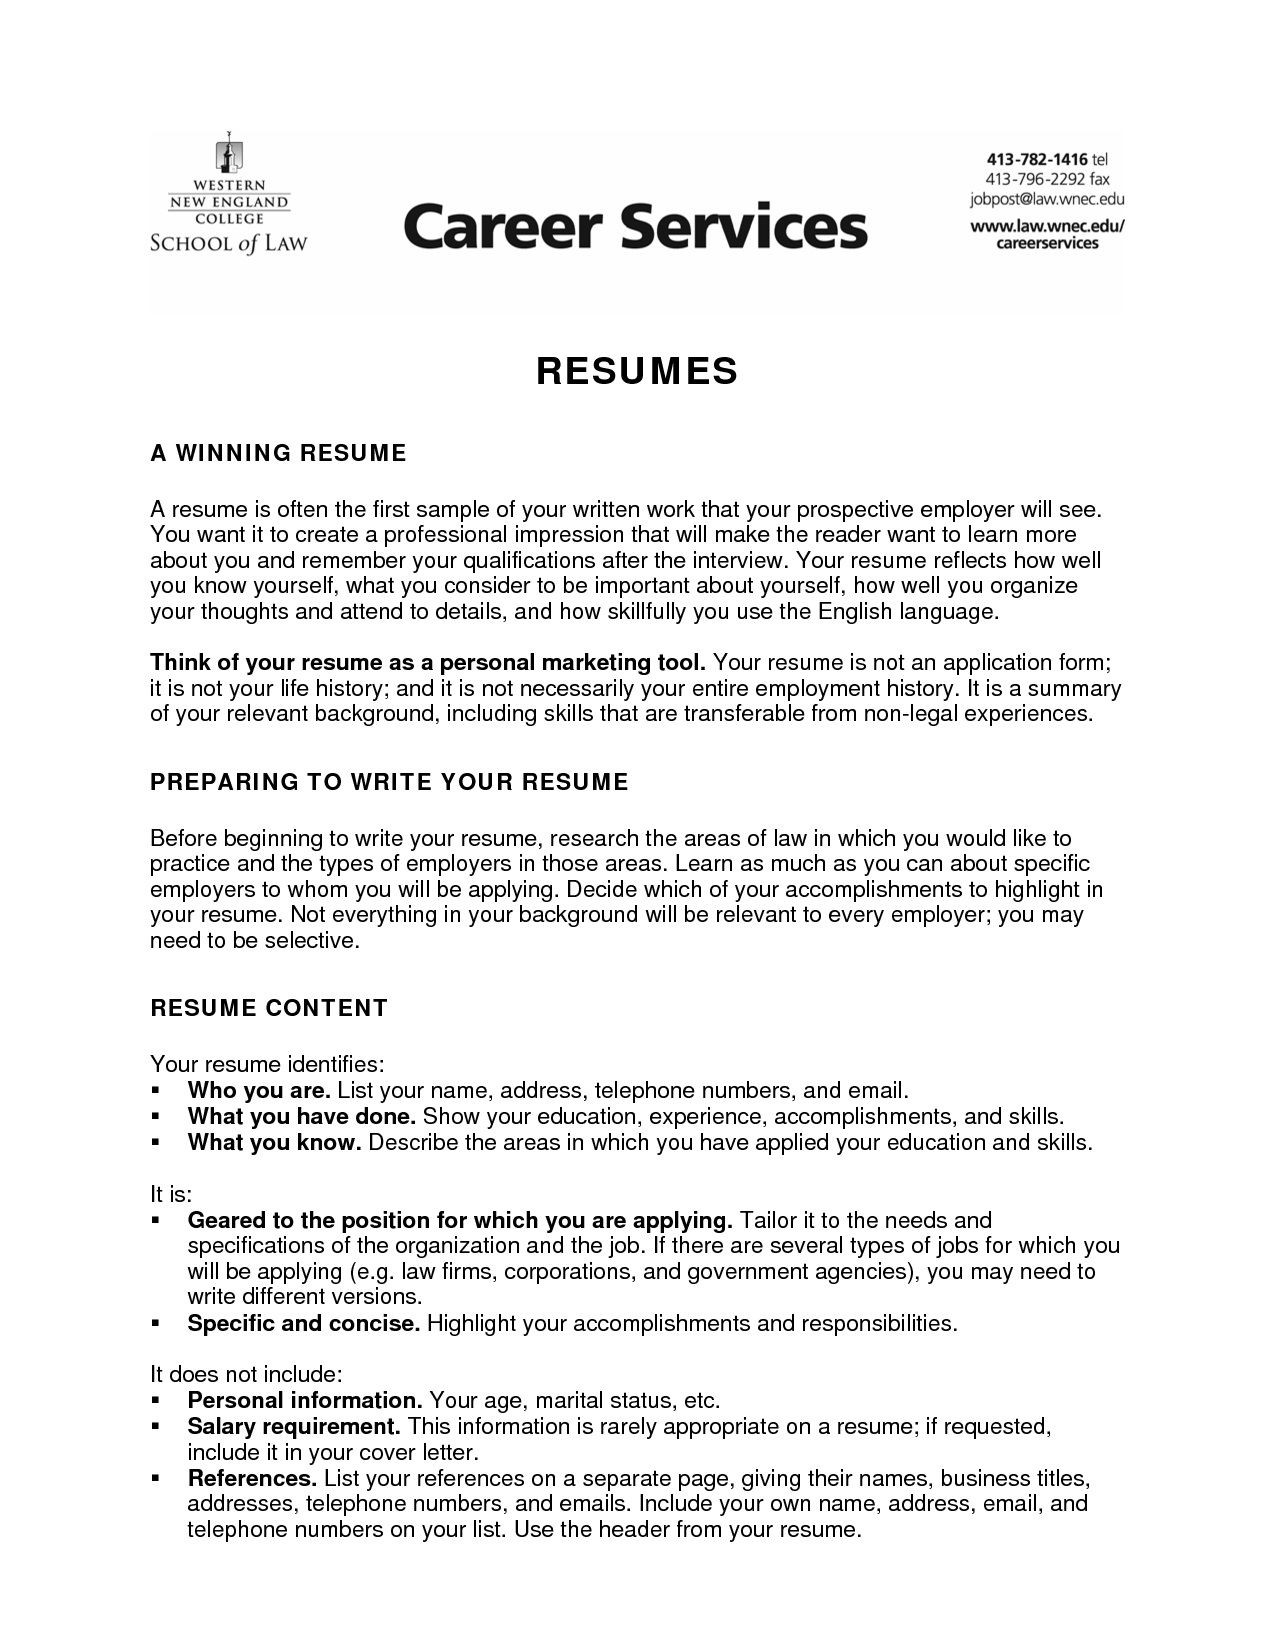 Sample Objective for Resume College Student God Objective for Resume Colege Student